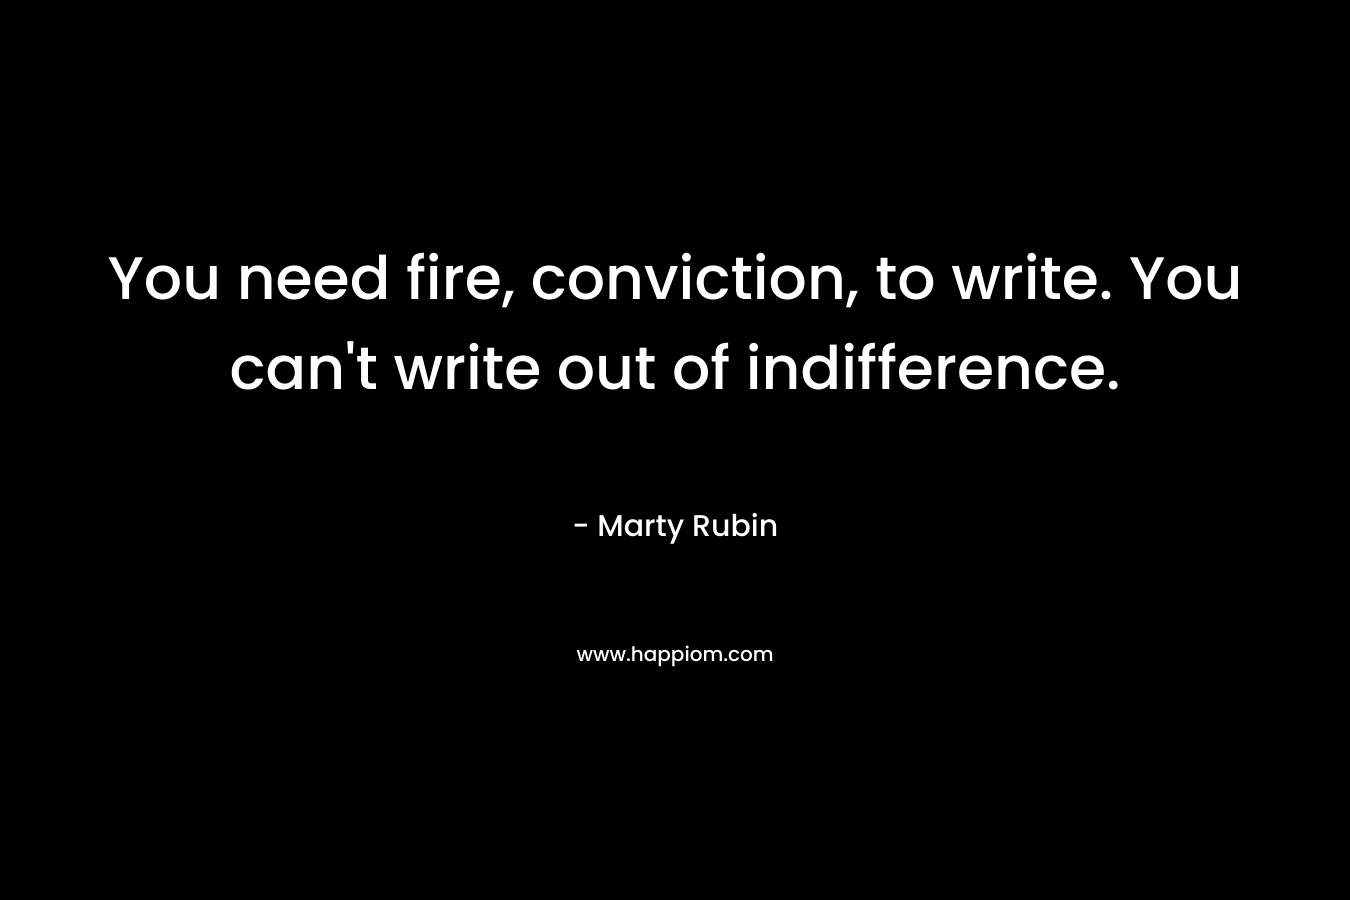 You need fire, conviction, to write. You can't write out of indifference.